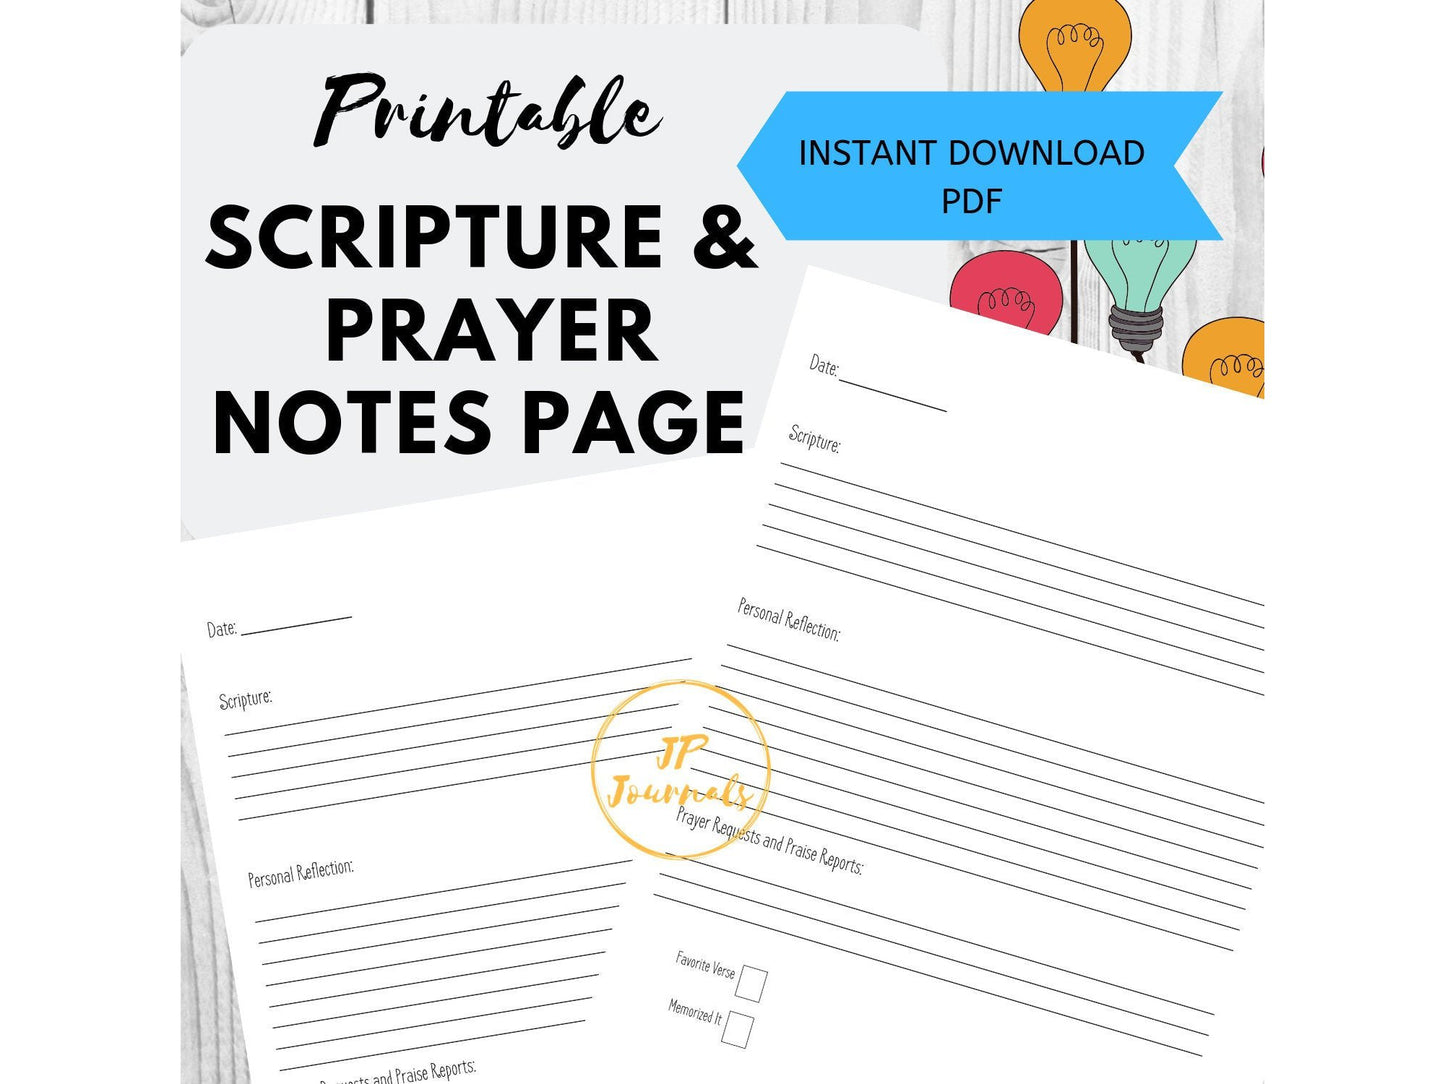 Scripture and Prayer Notes Printable PDF Page - Record Scripture, Personal Reflection, Prayer Requests and Praise Reports - DIY Devotional